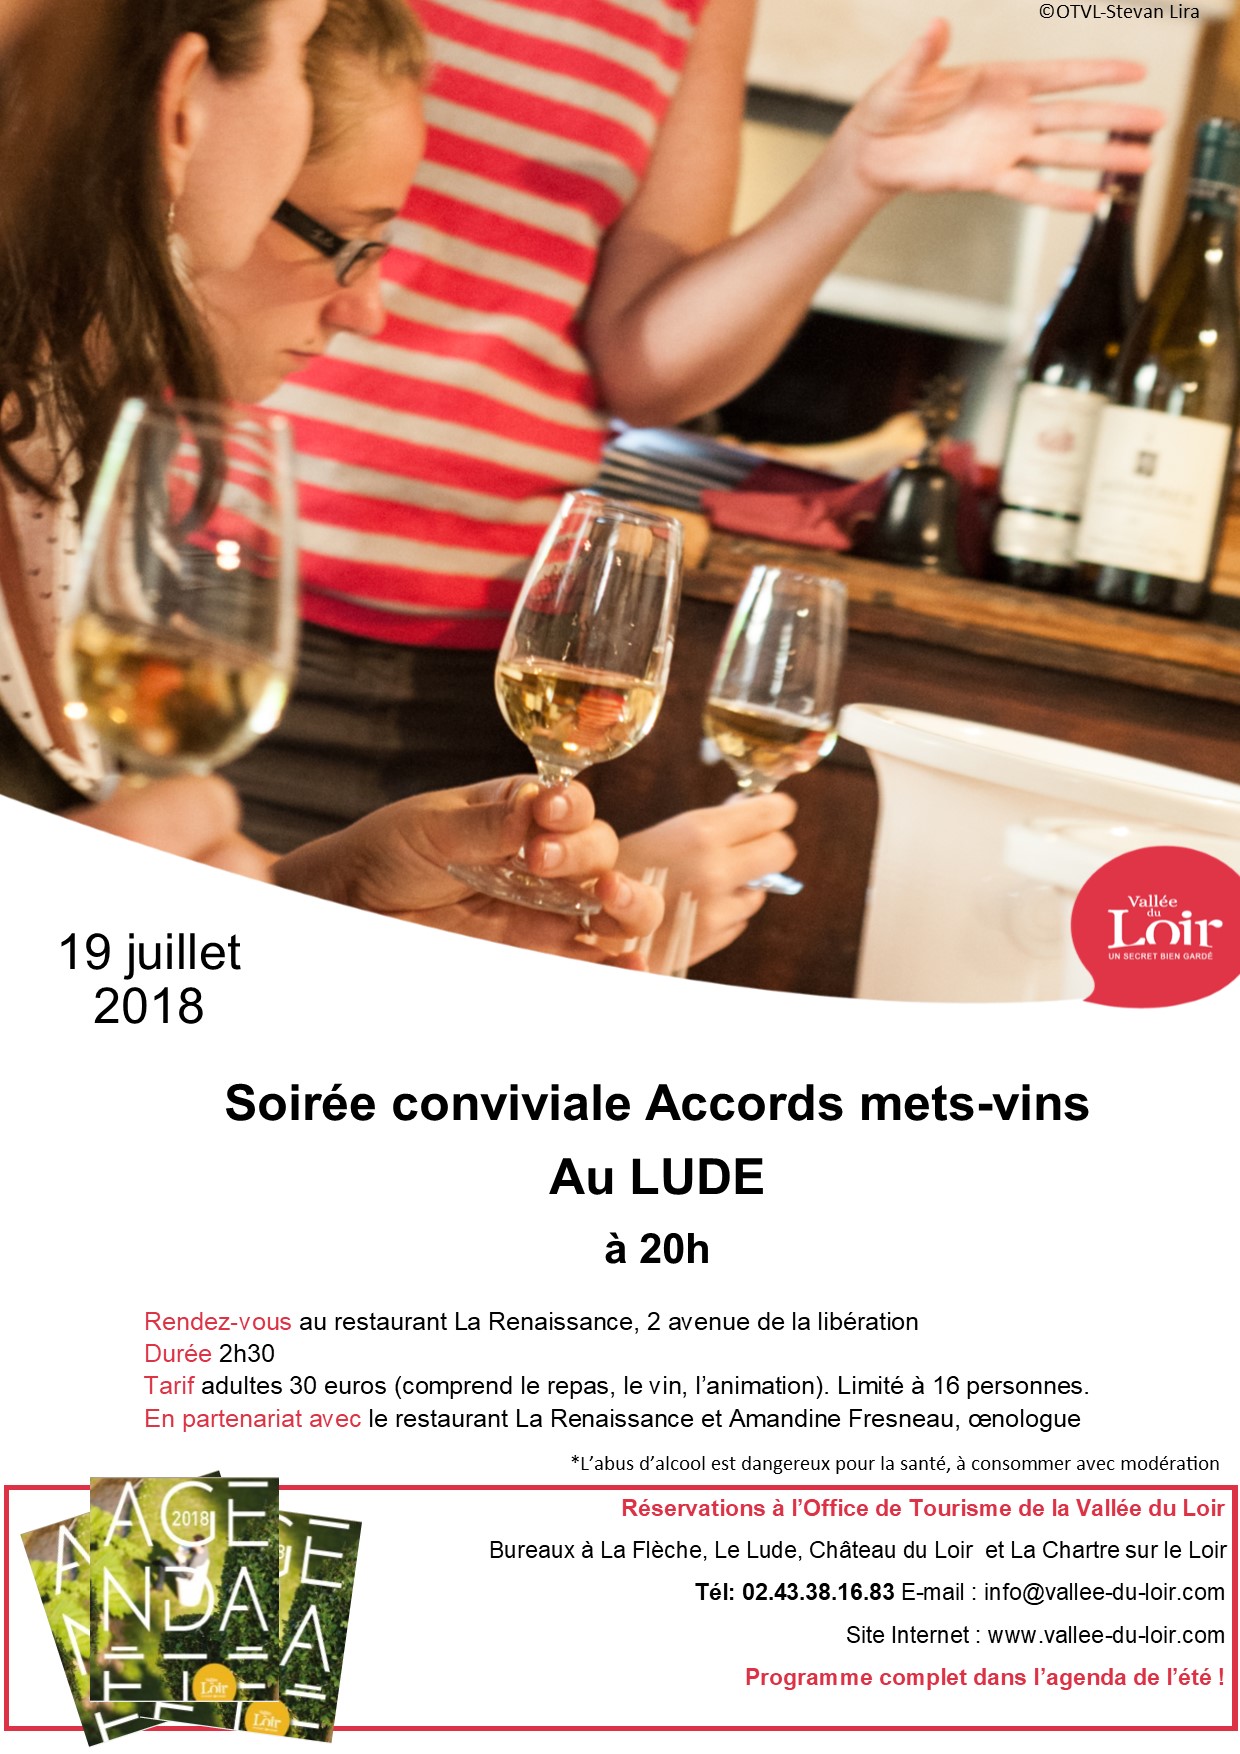 You are currently viewing Soirée conviviale Accords mets-vins